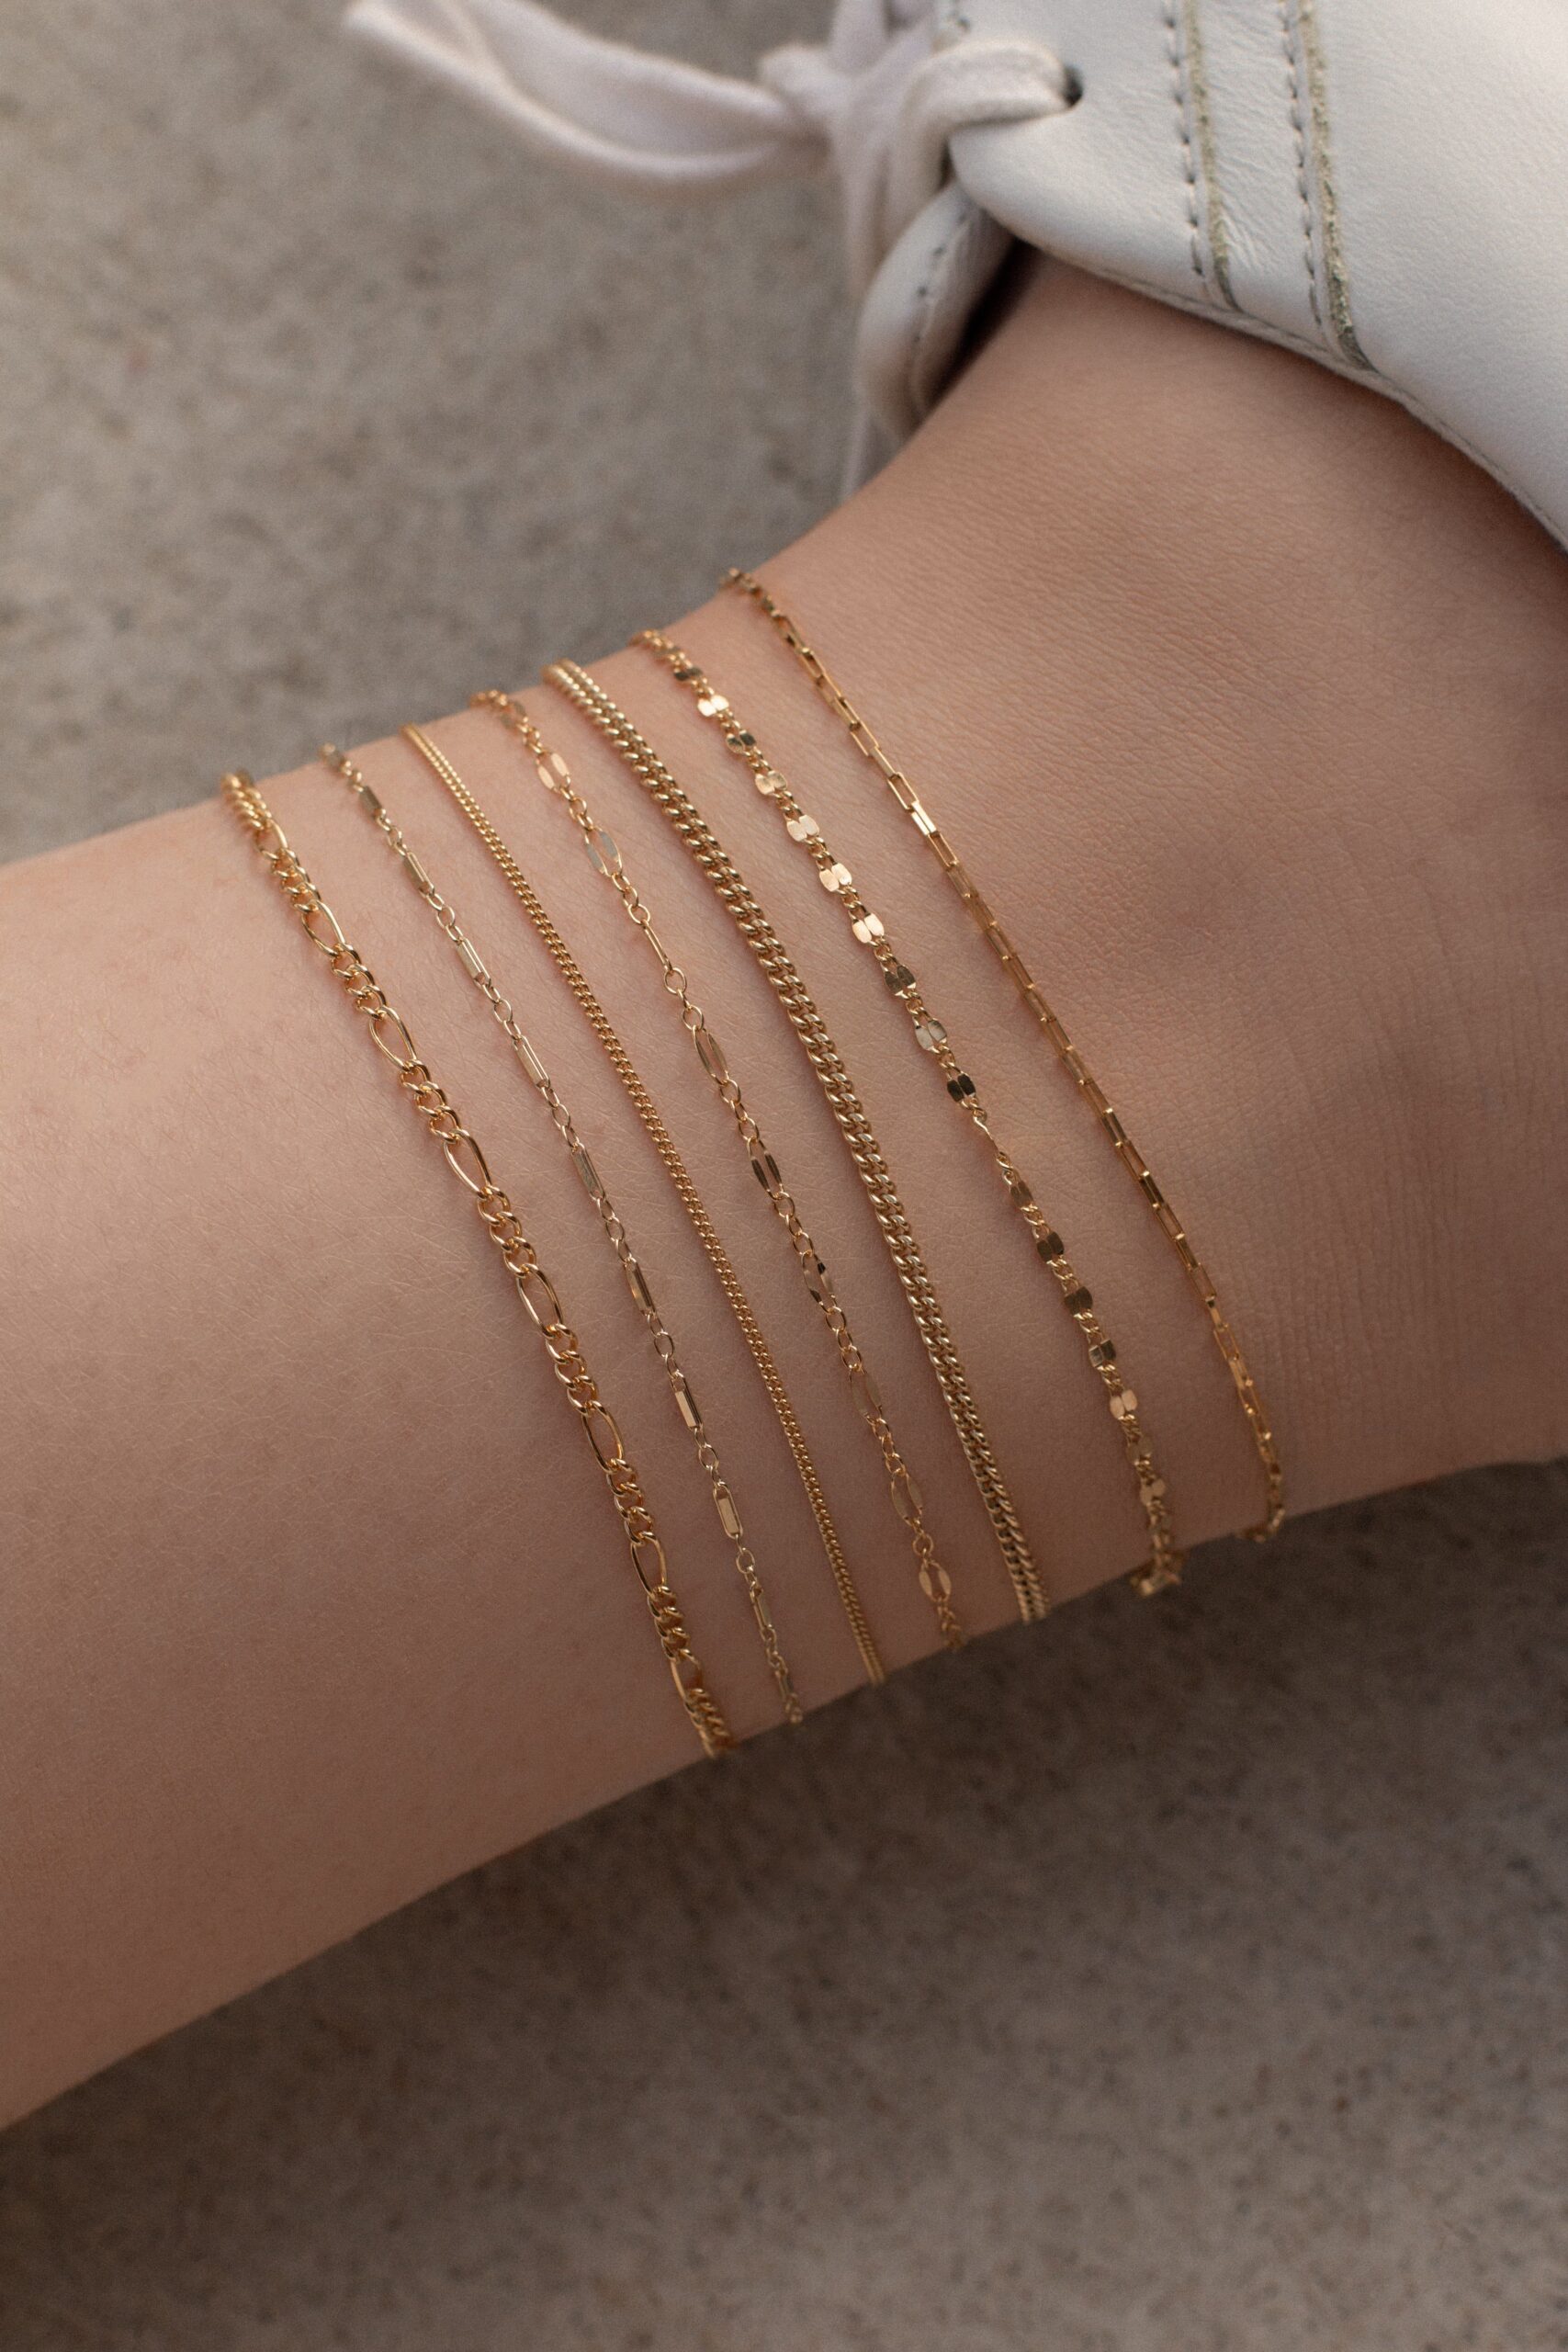 Beautiful designs of gold anklet to look appealing